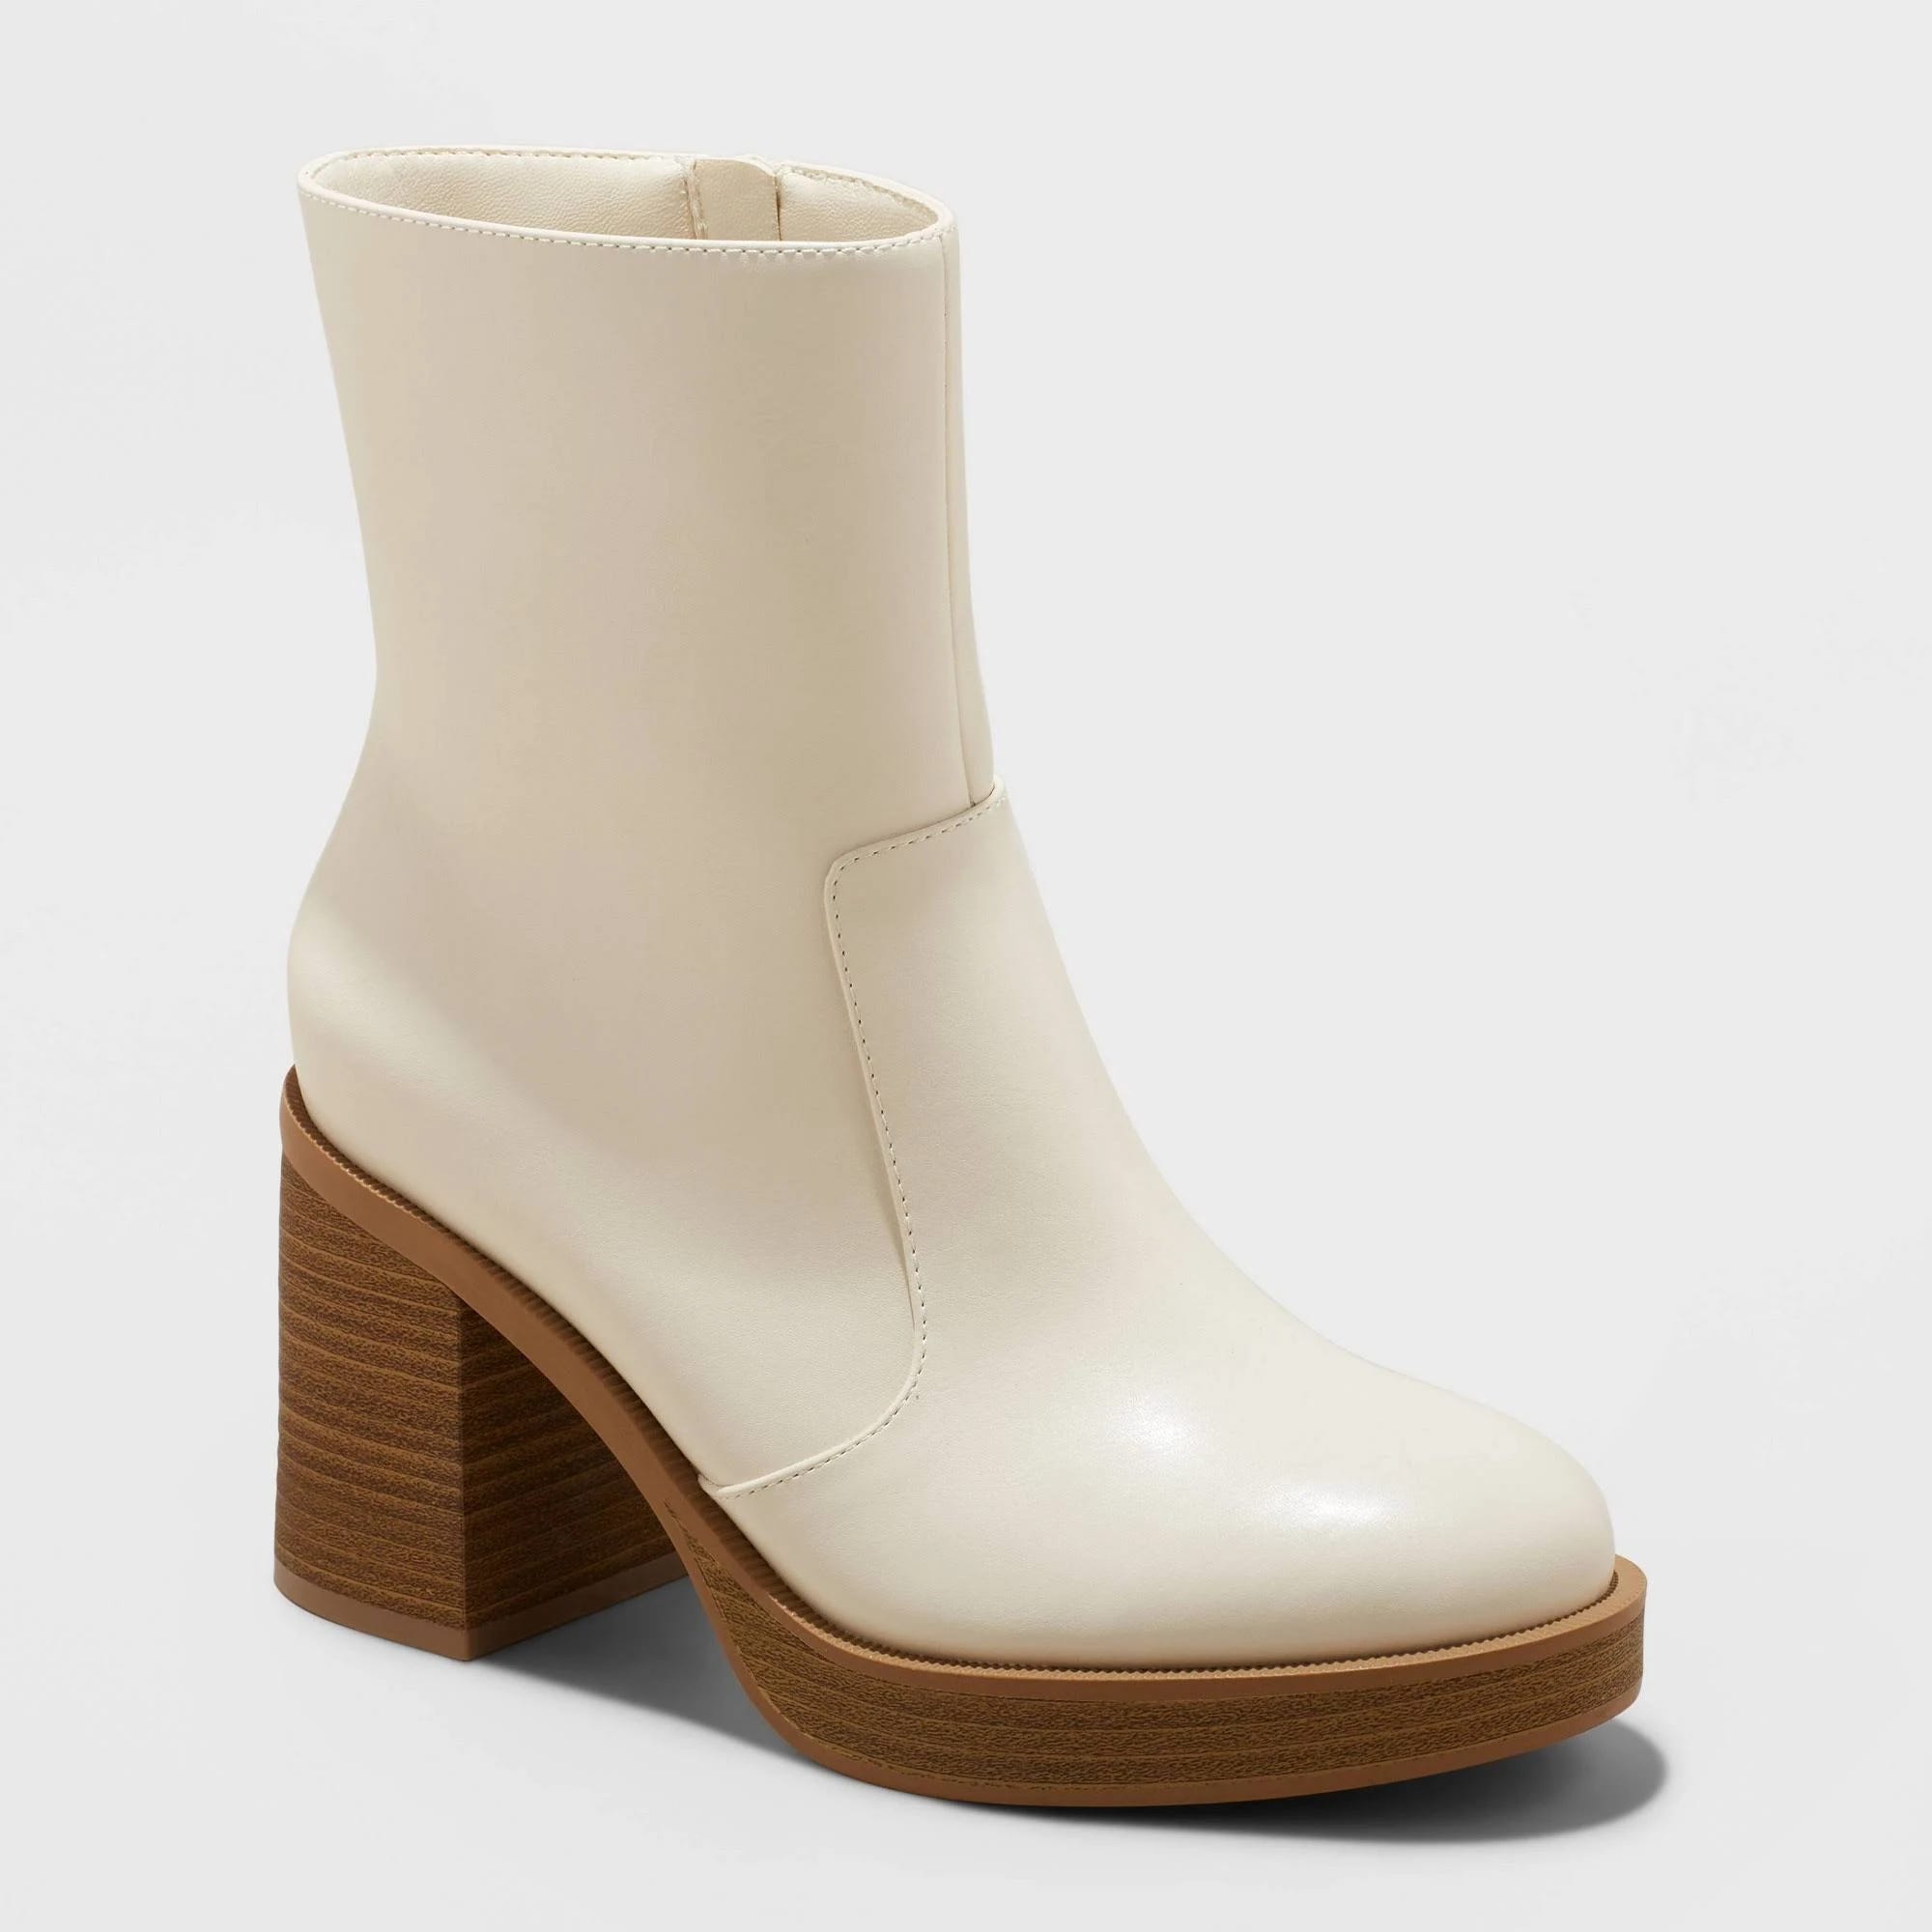 Classic White Platform Boots by Universal Thread | Image